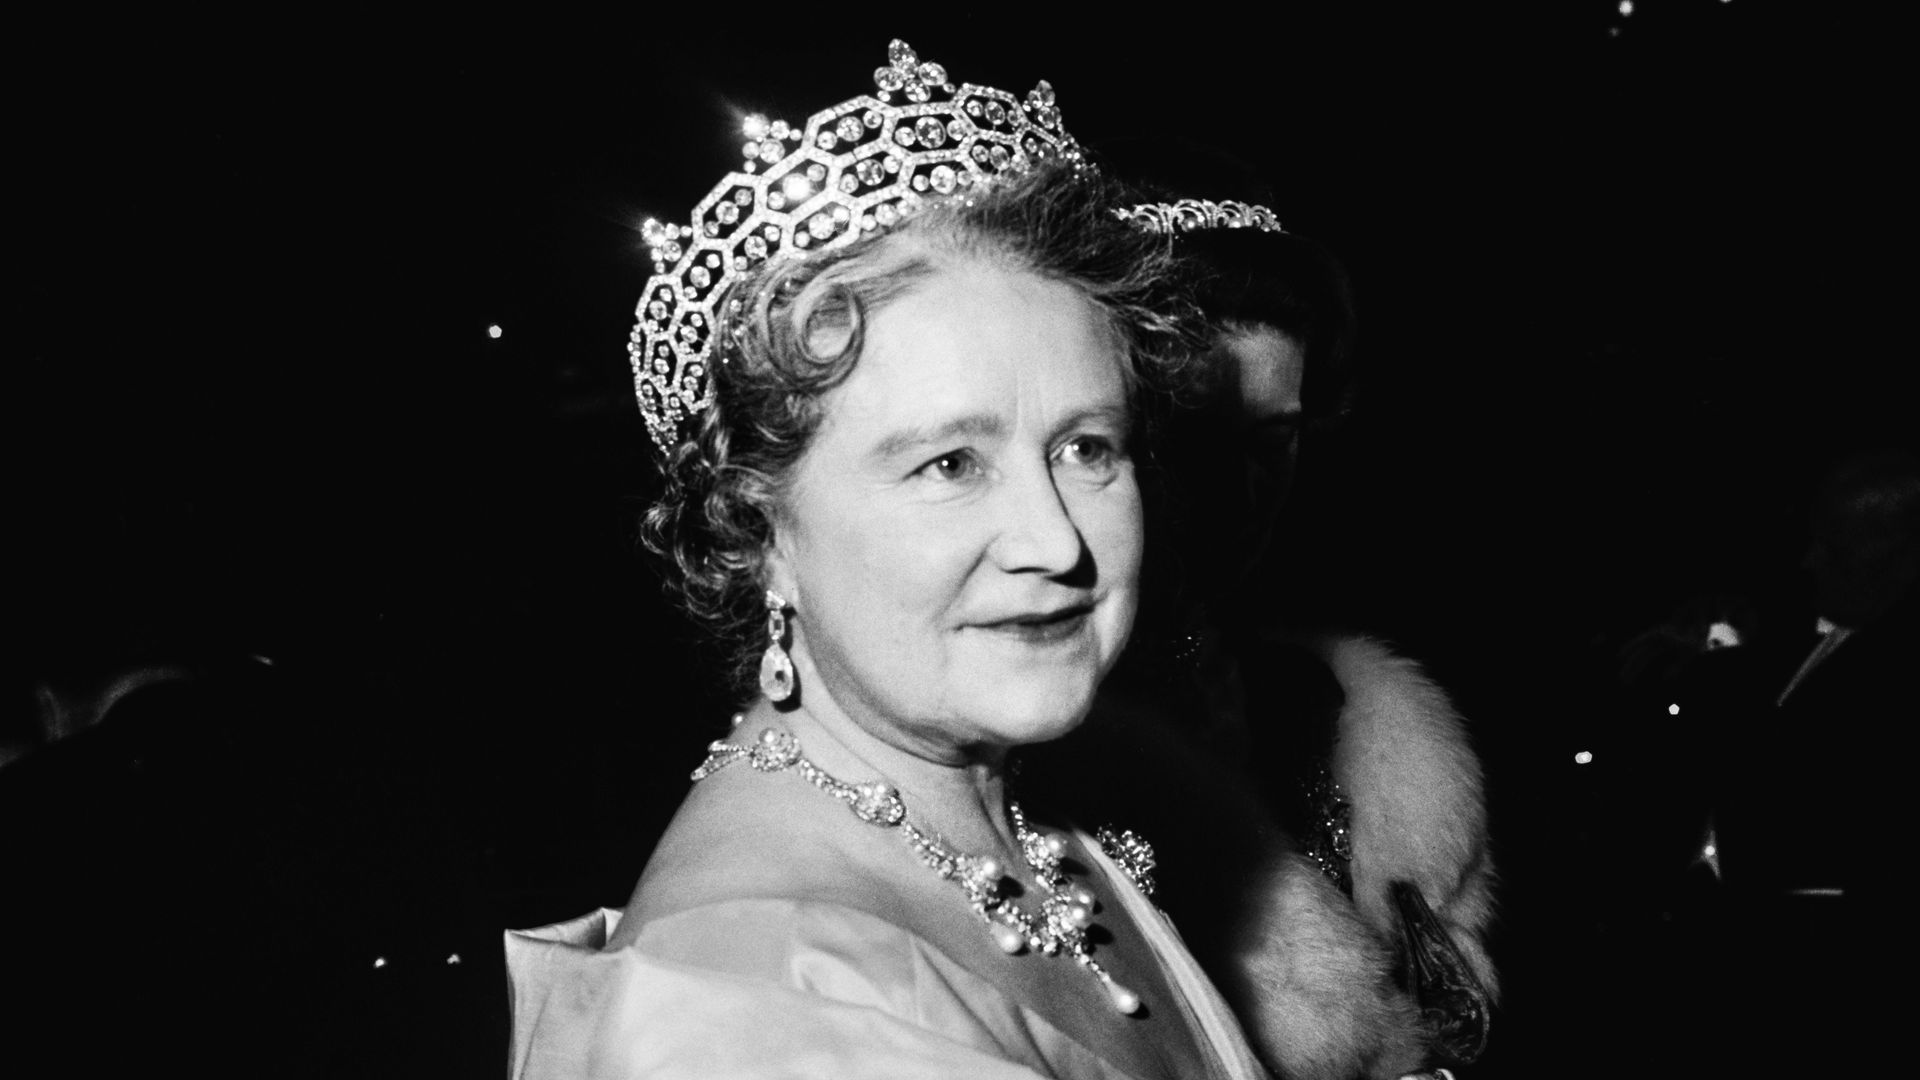 The Queen Mother was thought to be left-handed